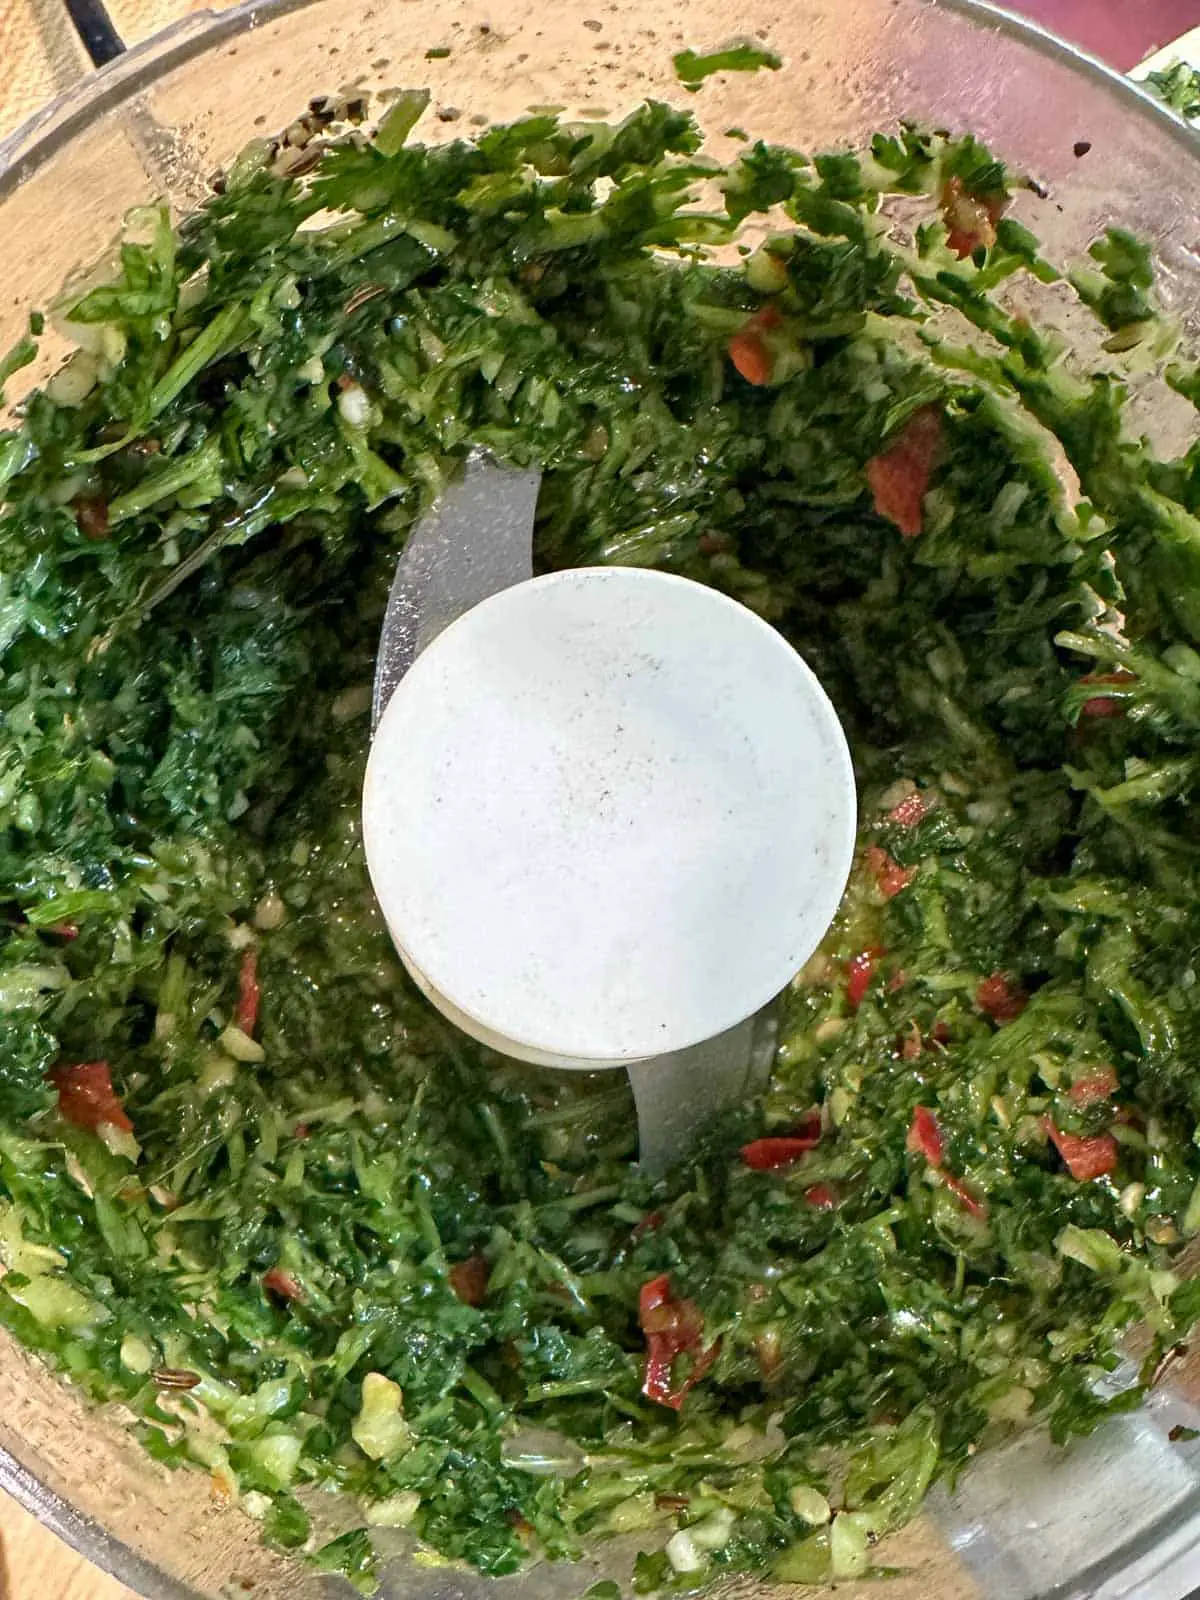 A food processor containing finely chopped cilantro, garlic, and chilis.